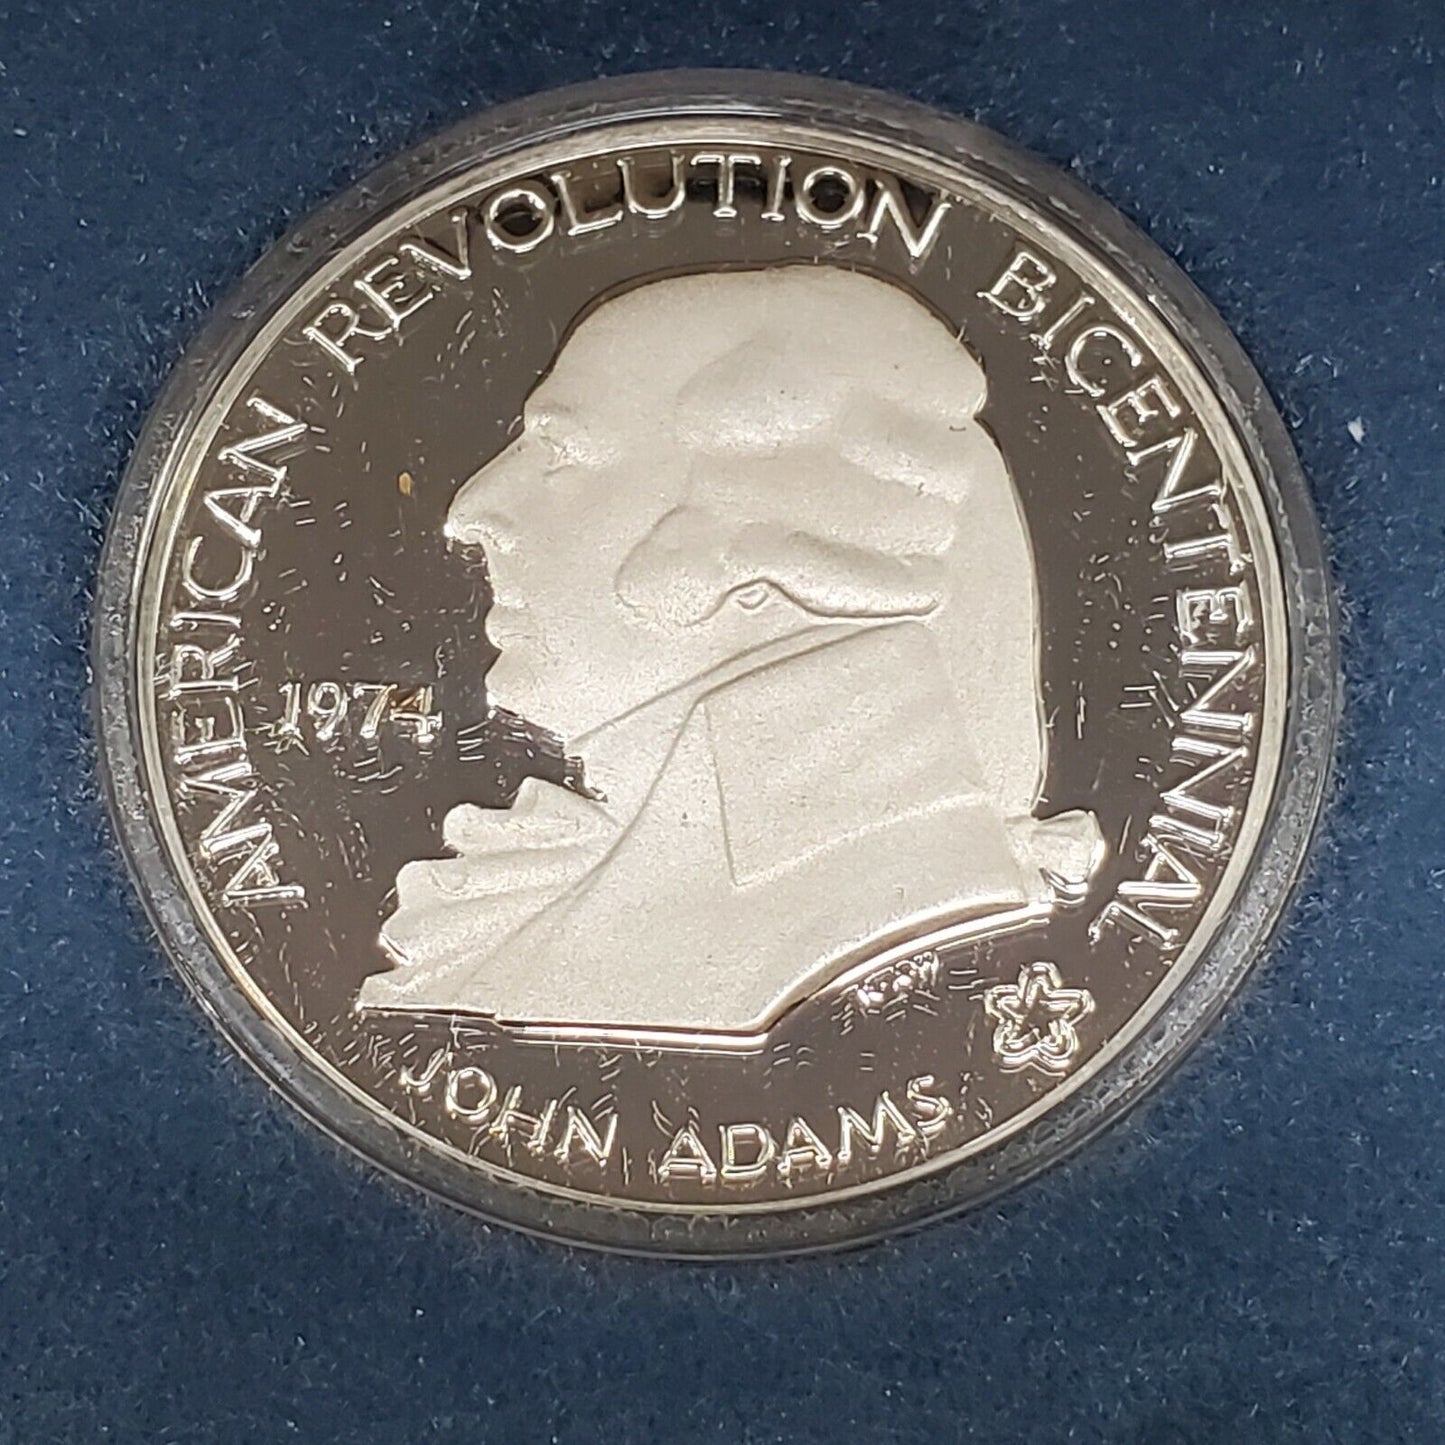 1974 Bicentennial Medal Commemorating The First Continental Congress